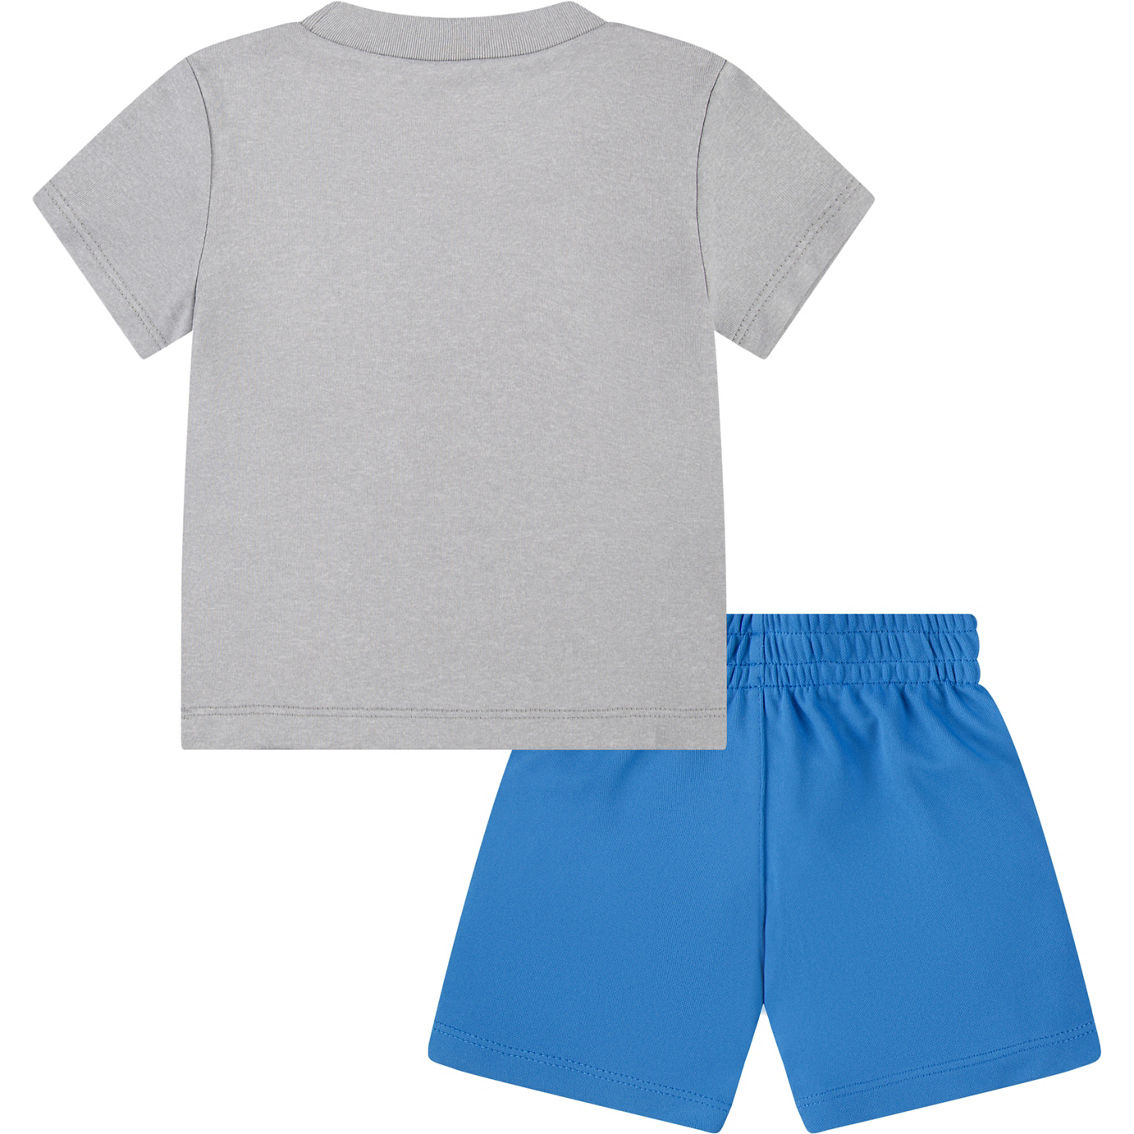 Nike Baby Boys Dri-FIT Sportball Tee and Shorts 2 pc. Set - Image 2 of 5